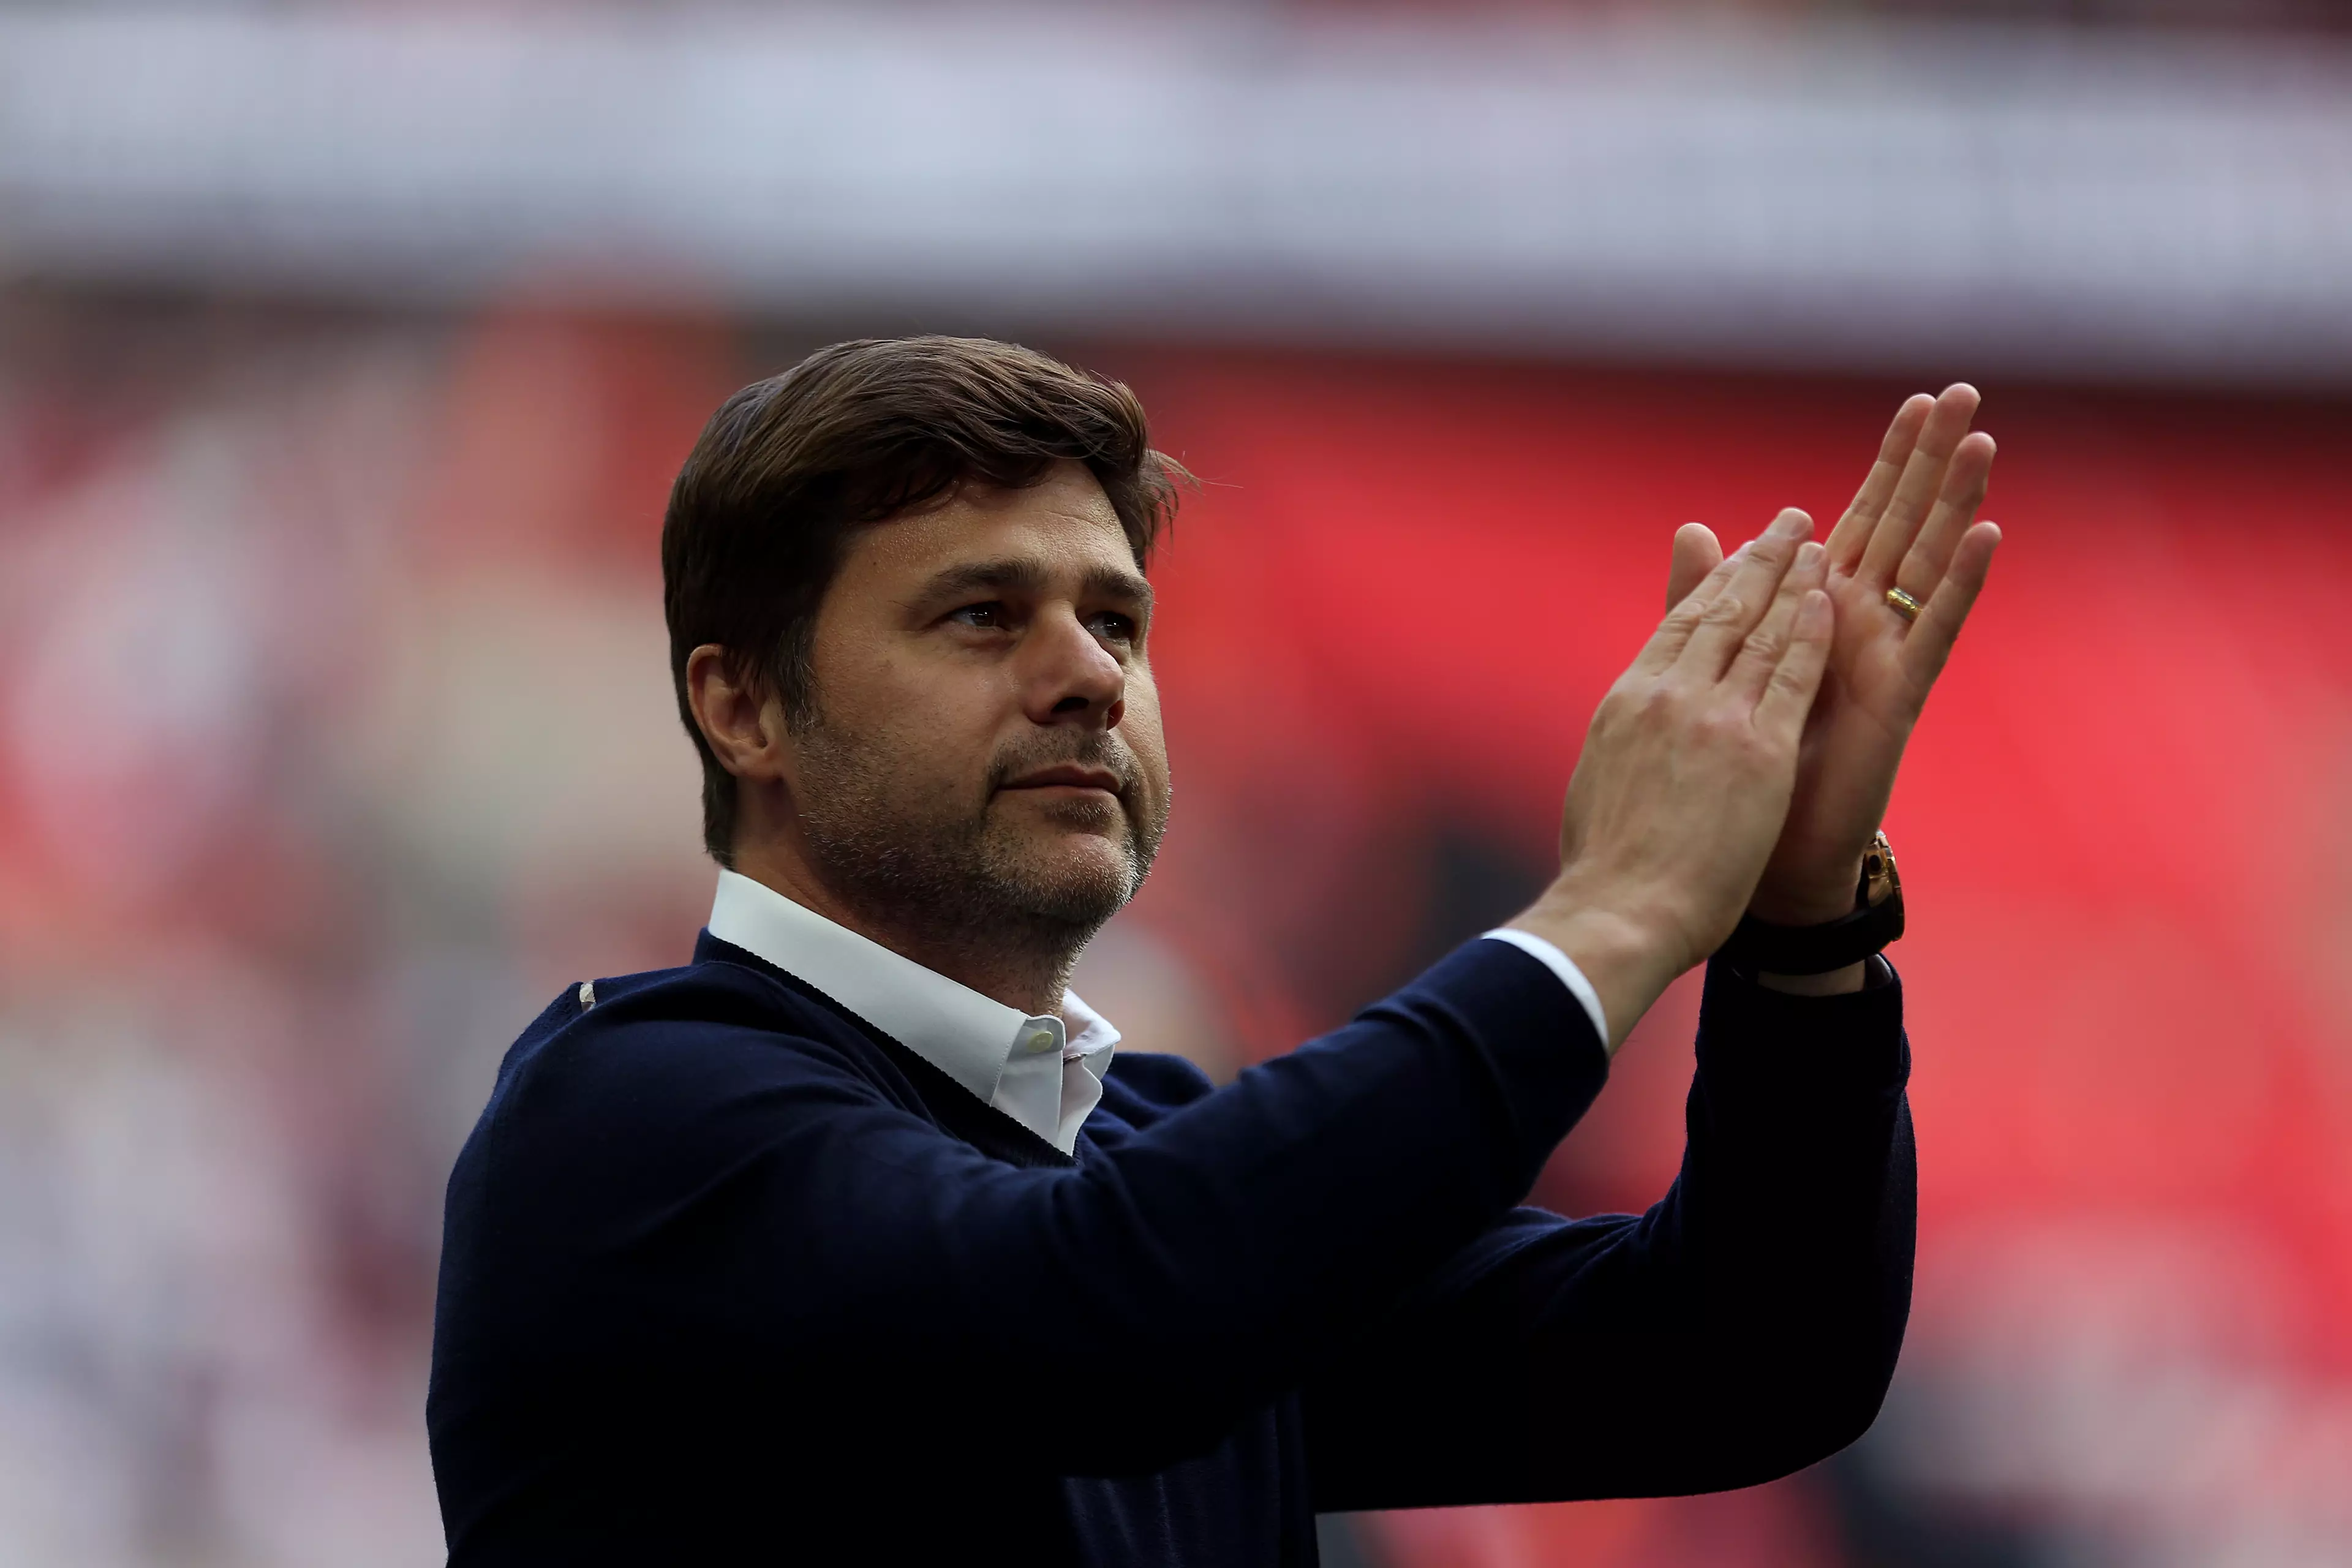 Pochettino led Spurs to third and a FA Cup semi final this season. Image: PA Images